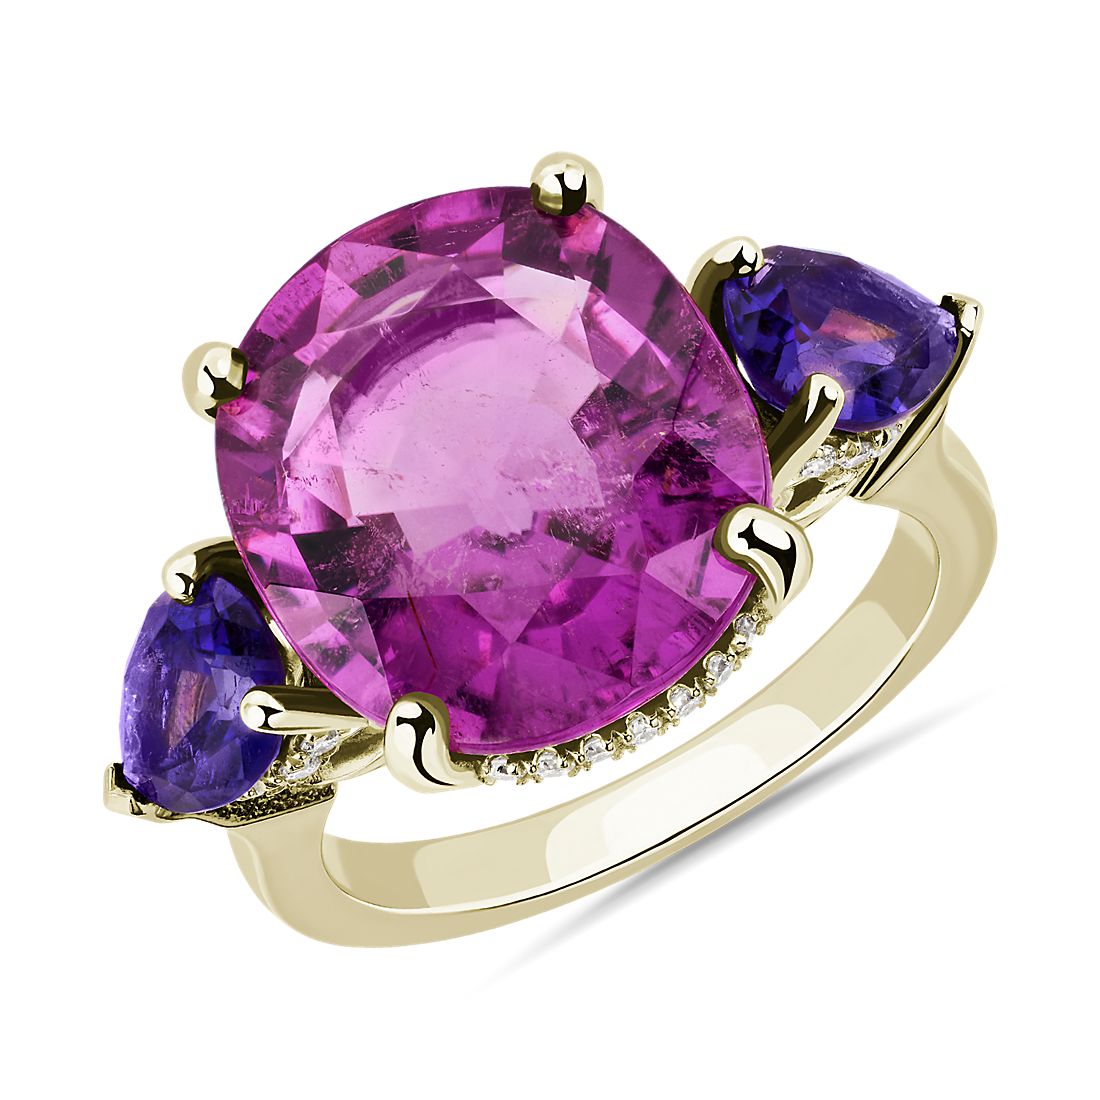 Pink Tourmaline and Amethyst Three Stone Ring with Hidden Halo in 18k Yellow Gold